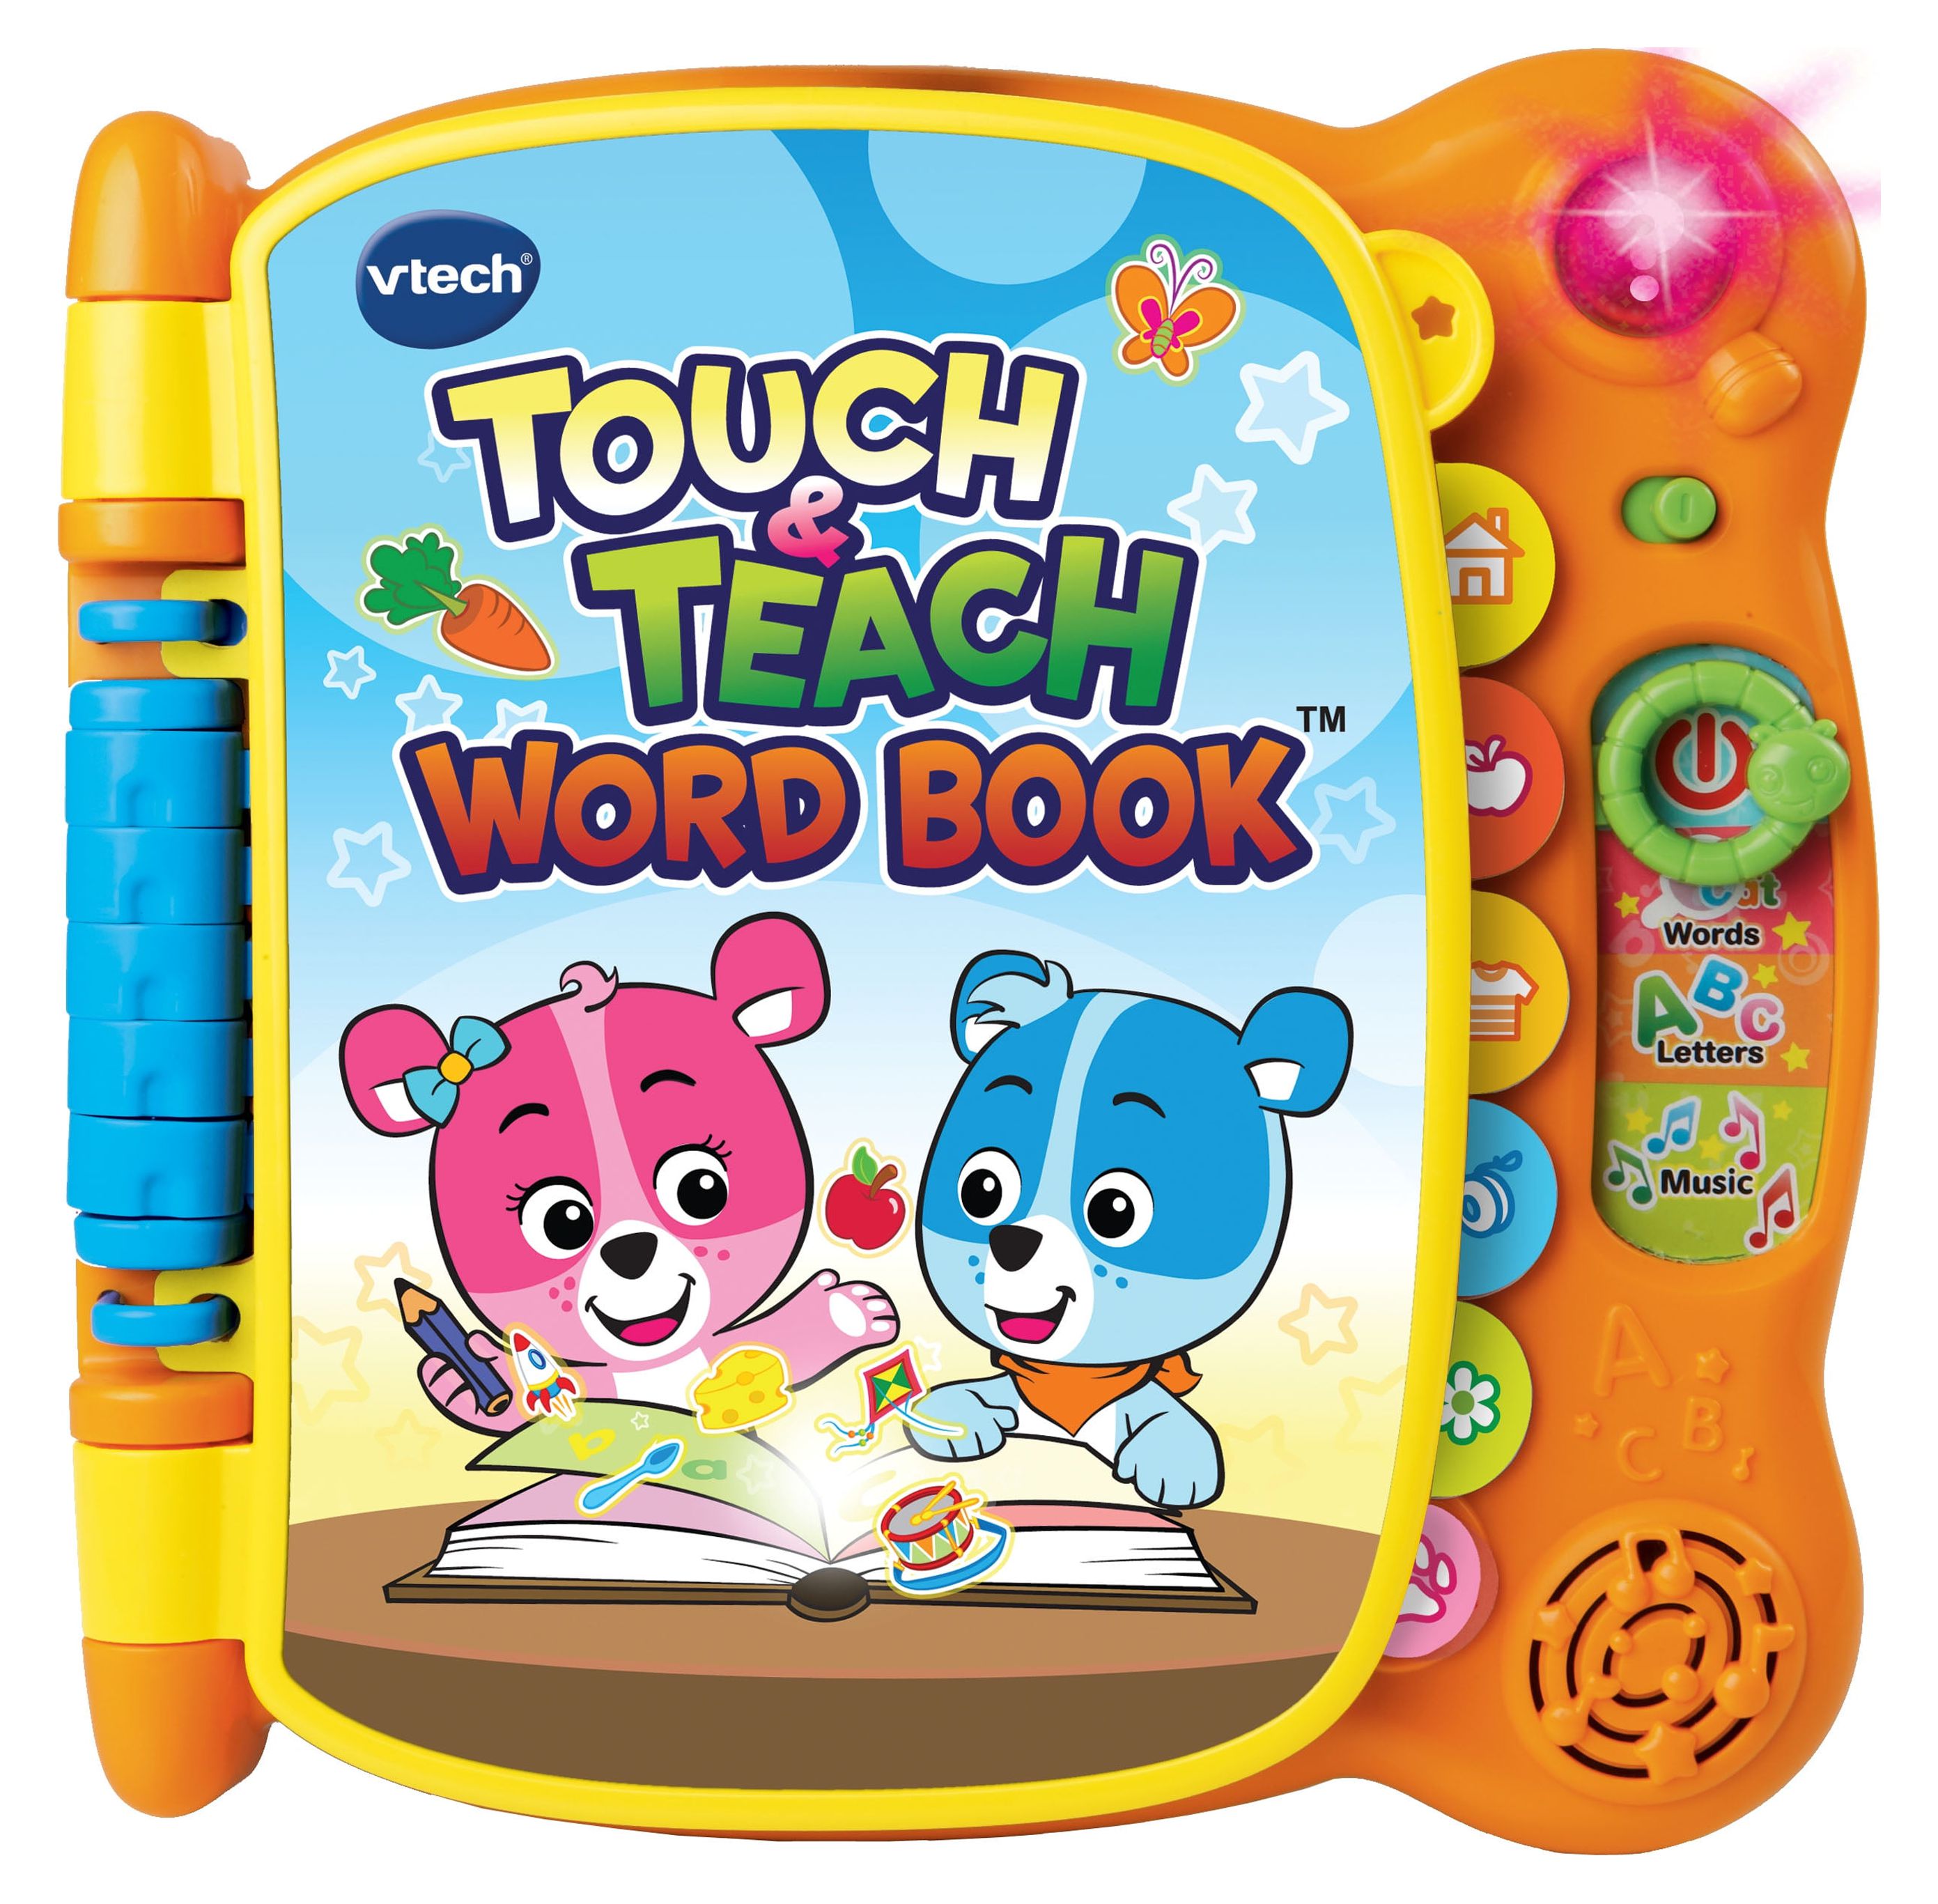 VTech Touch and Teach Word Book Featuring More Than 100 Words - image 1 of 5